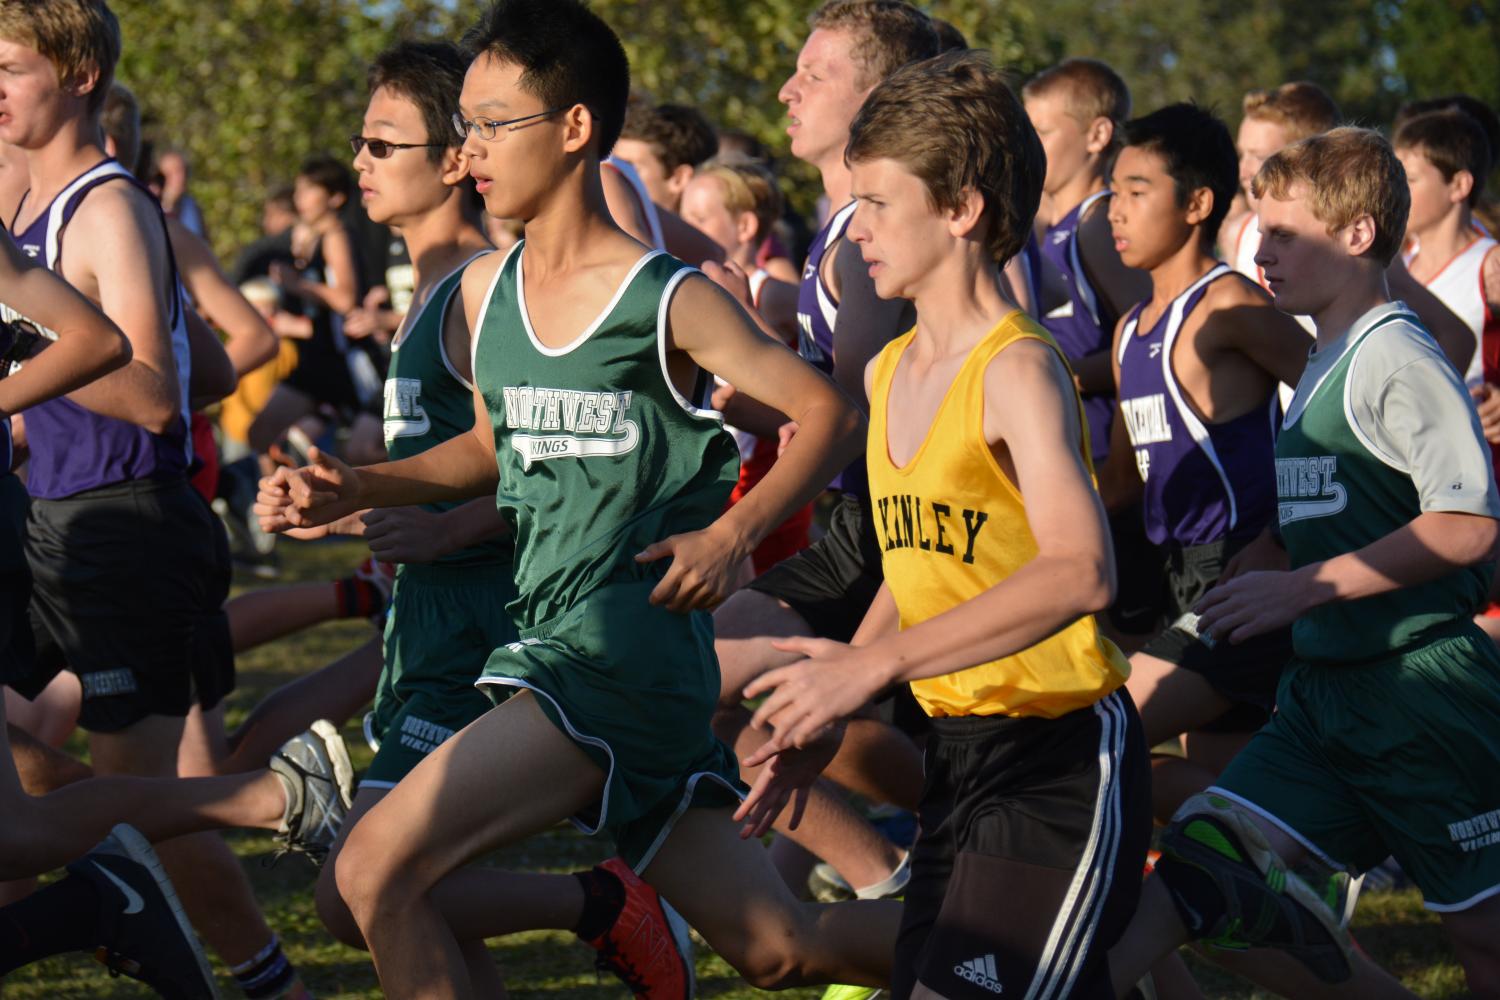 Chen-You Wu 20 speeds toward the finish line at the MCV divisional race in 2015